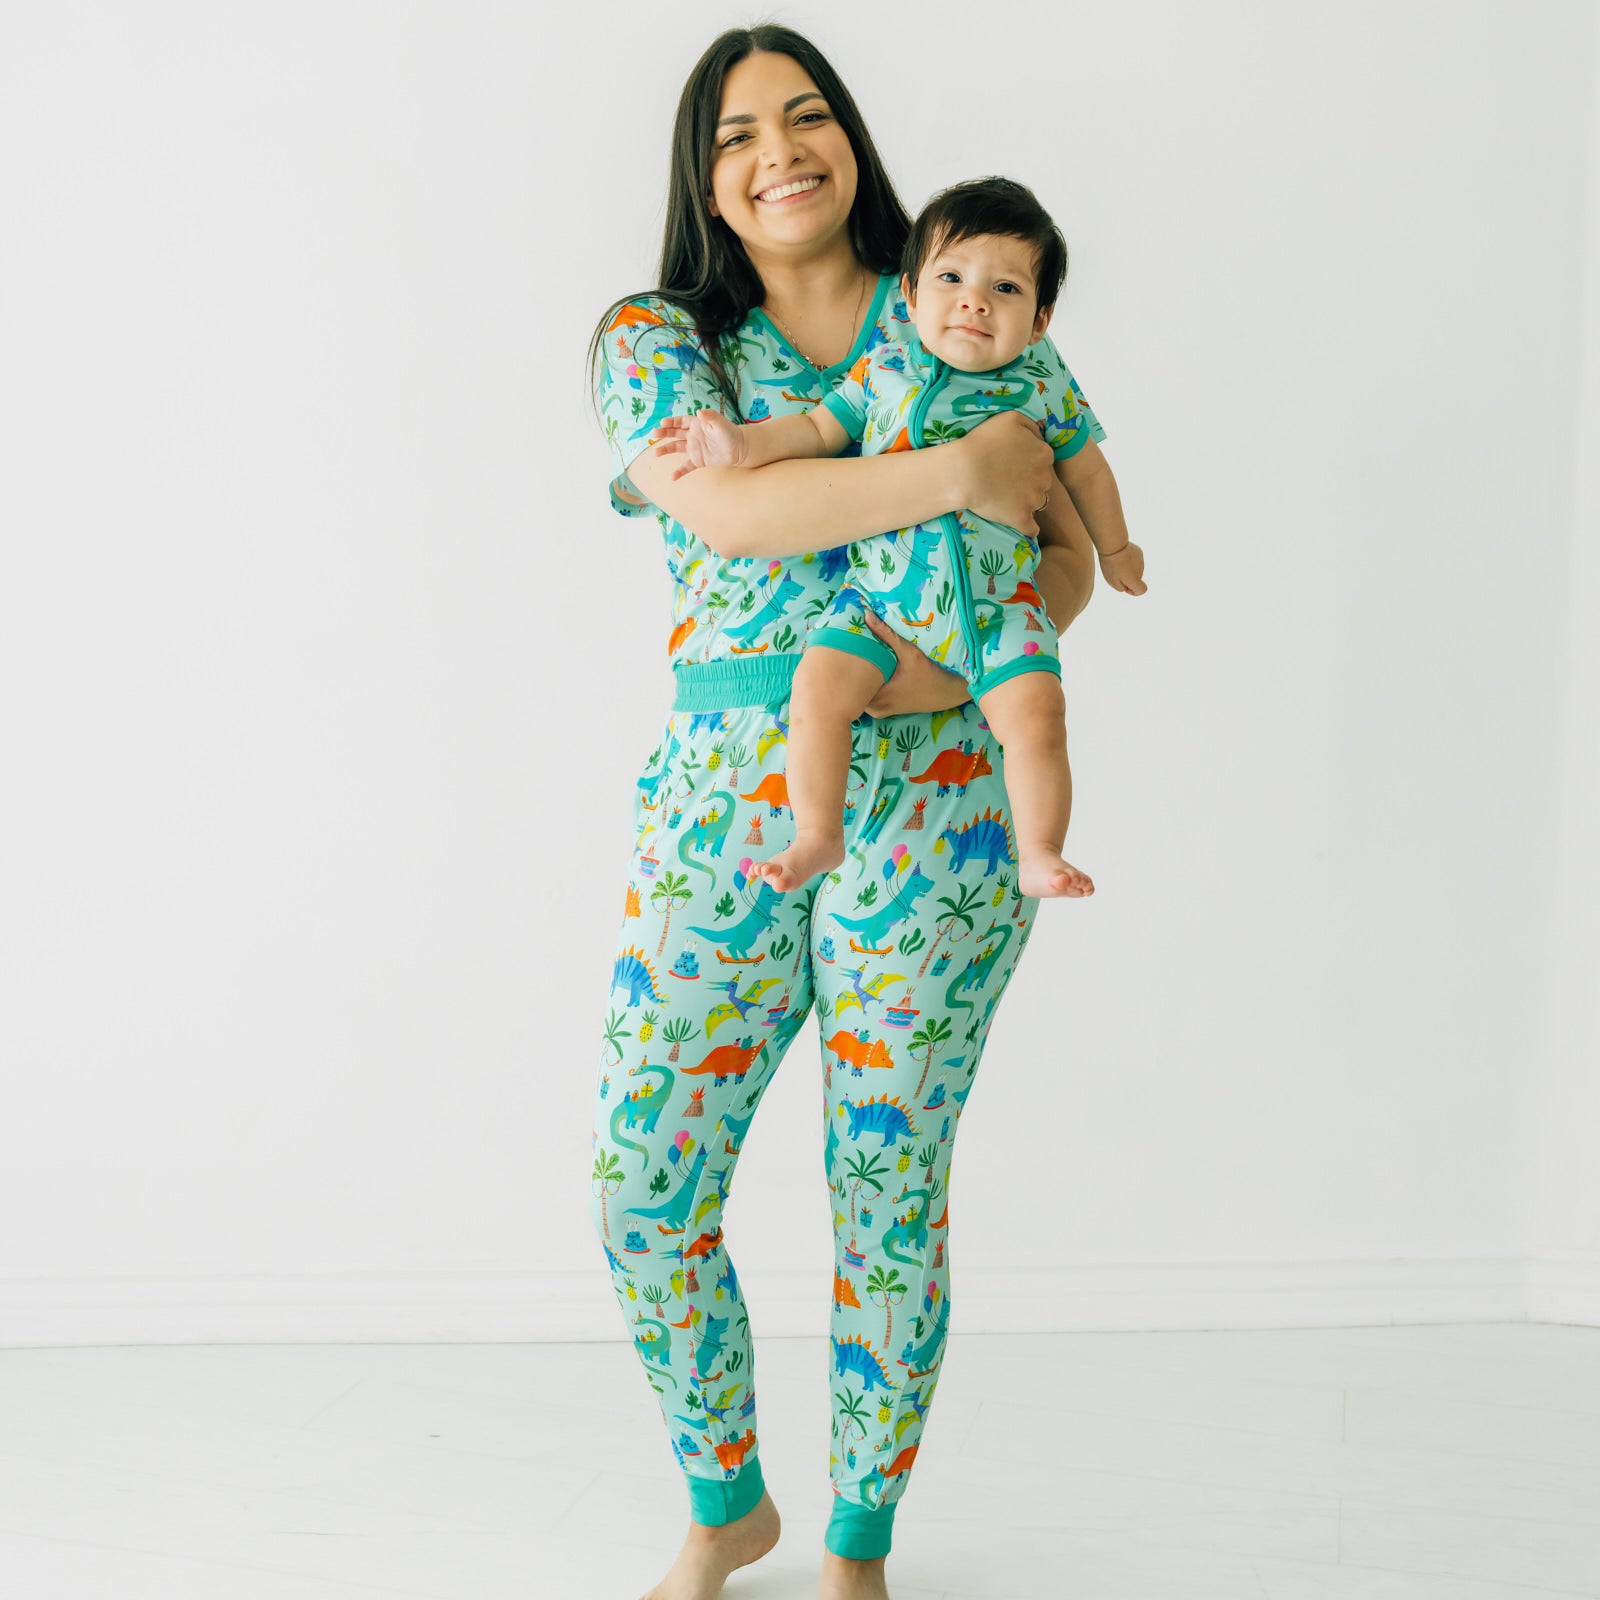 Woman with her child wearing Prehistoric Party women's pj pants and matching women's pj top. Her child is wearing a matching printed shorty zippy